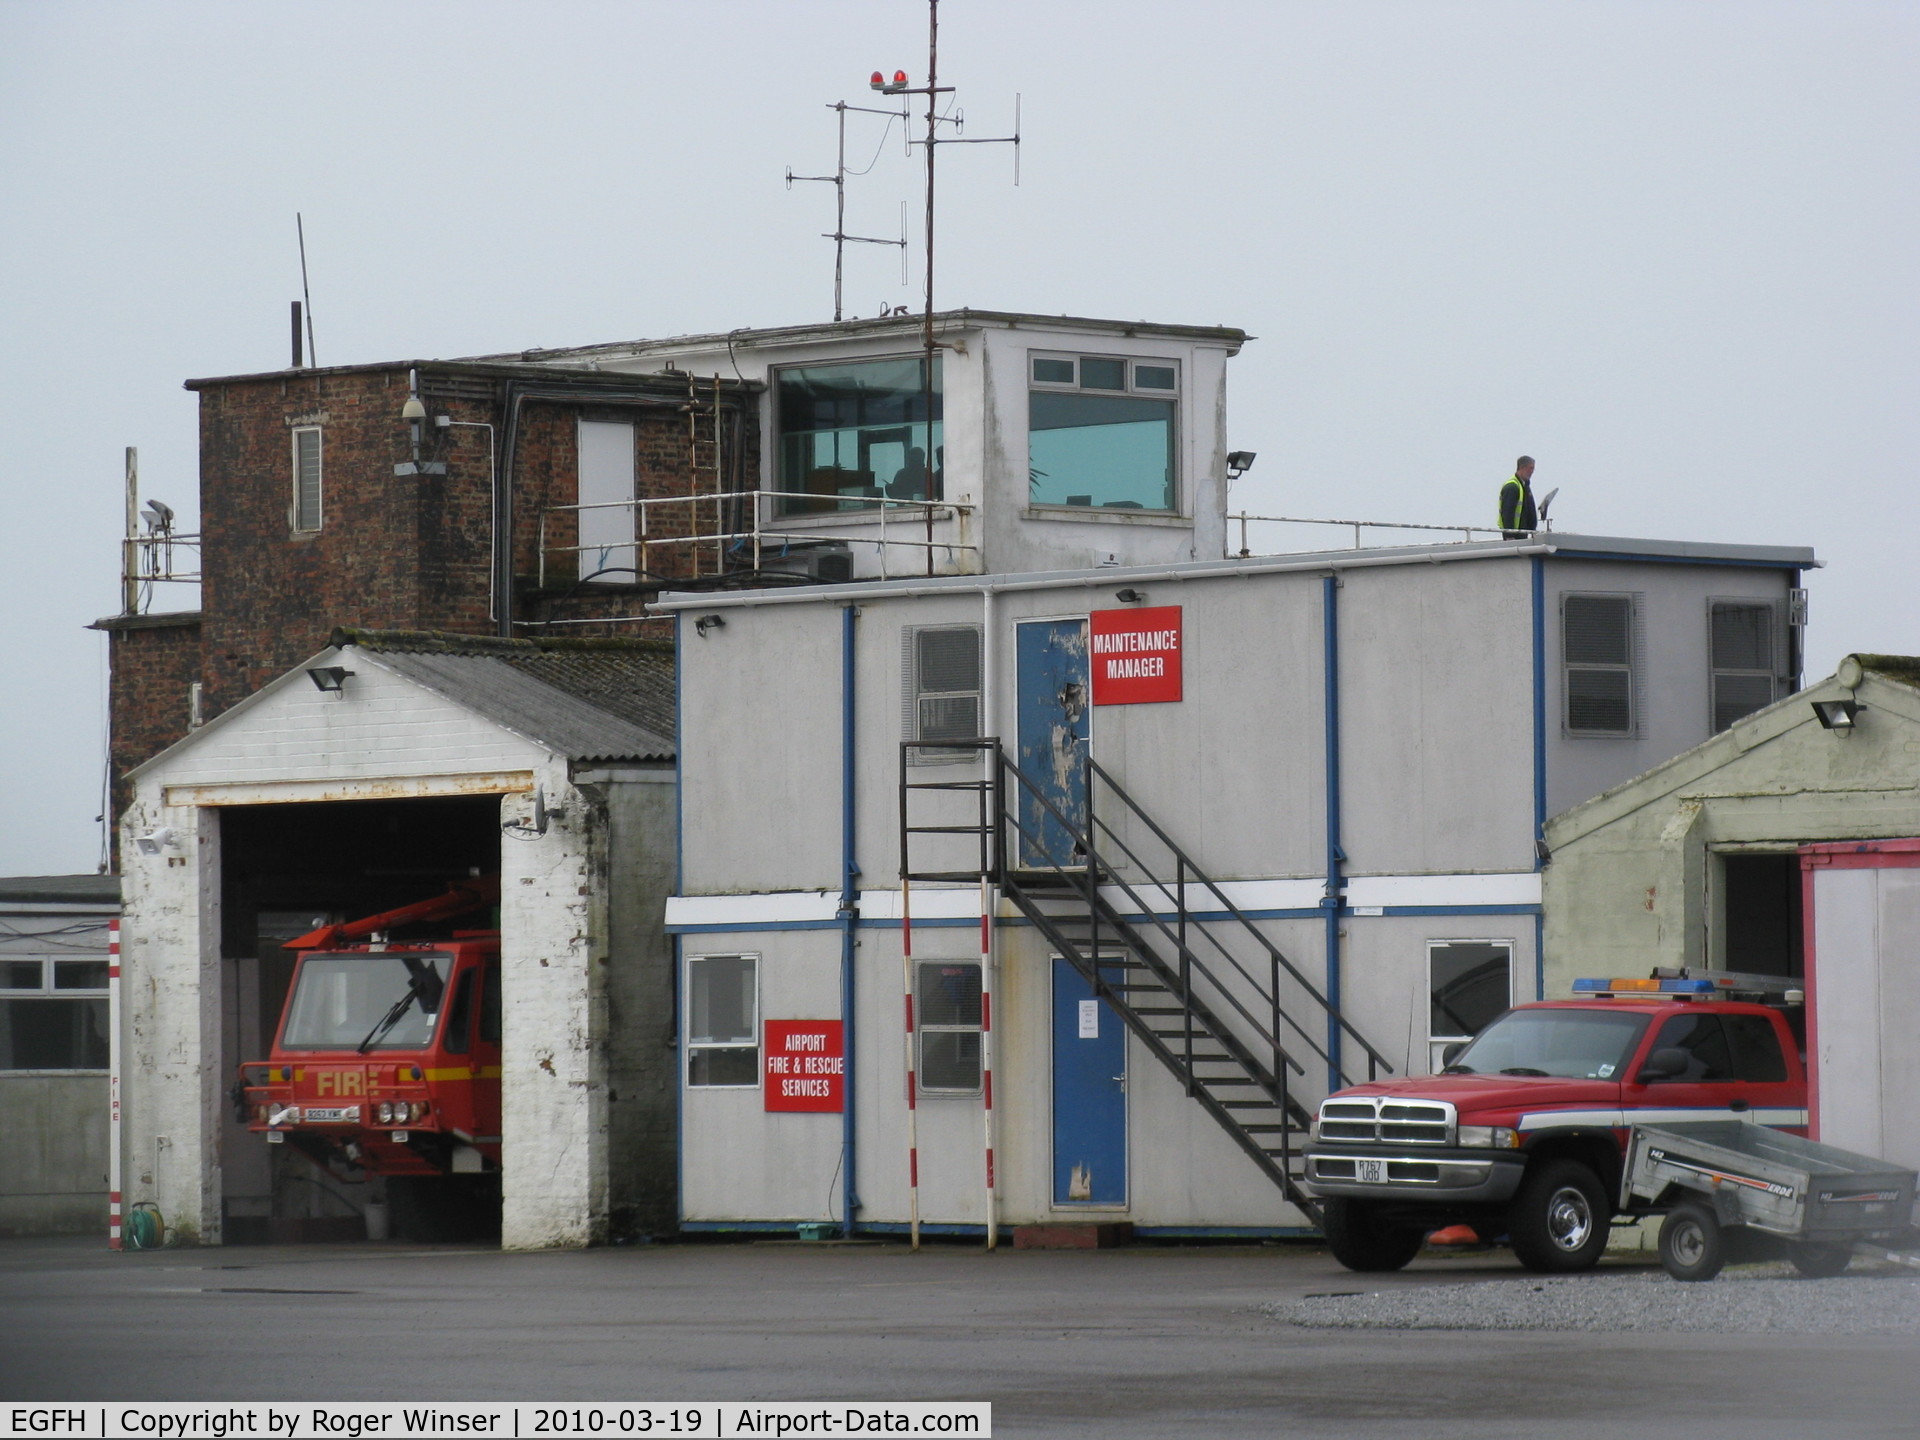 Swansea Airport, Swansea, Wales United Kingdom (EGFH) - 1941 built RAF watch office/control tower, trailer and tractor shed and fire tender shed